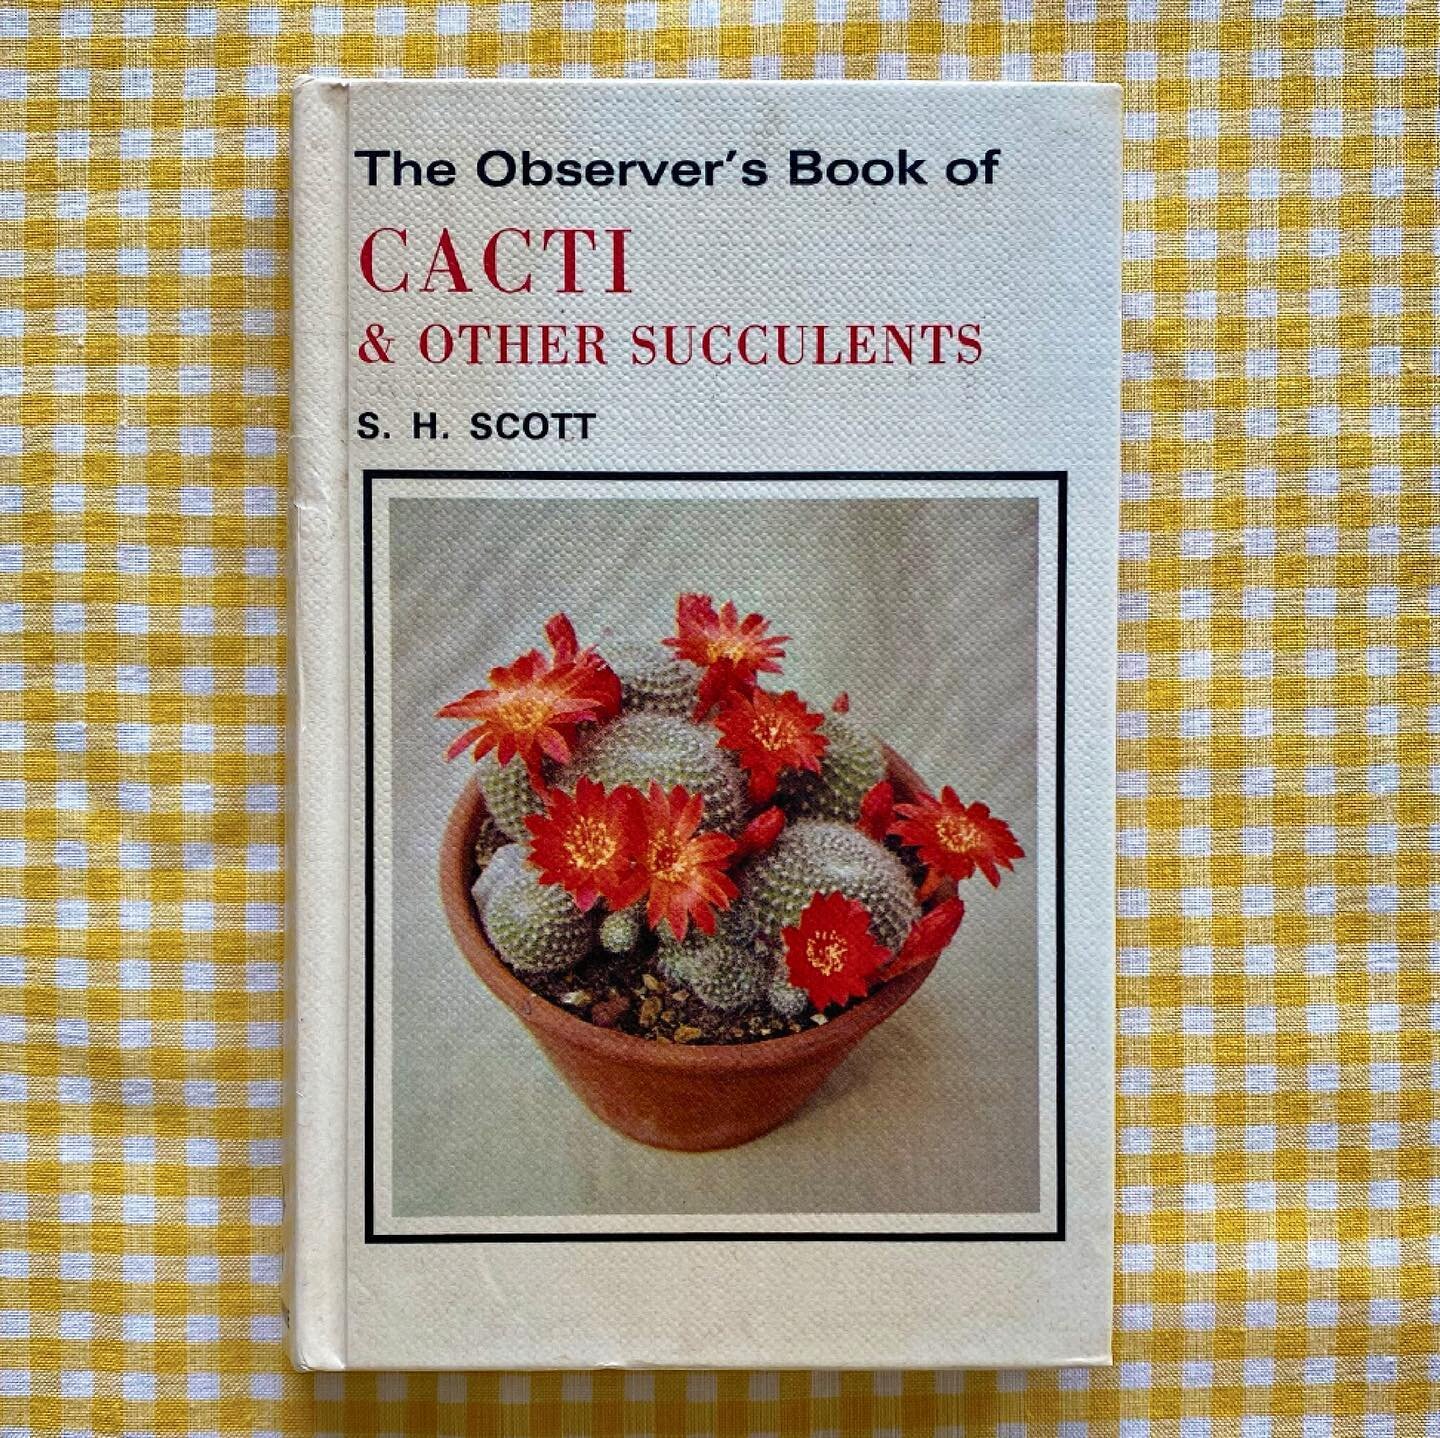 &ldquo;All plants require a period of rest&rdquo;

The Observer&rsquo;s Book of Cacti &amp; Other Succulents, Second Edition 1981
Frederick Warne Publishers Ltd
By S.H Scott &amp; J.W.P Mullard

#cacti #cactus #notocactus #astrophytum #echinopsis #co